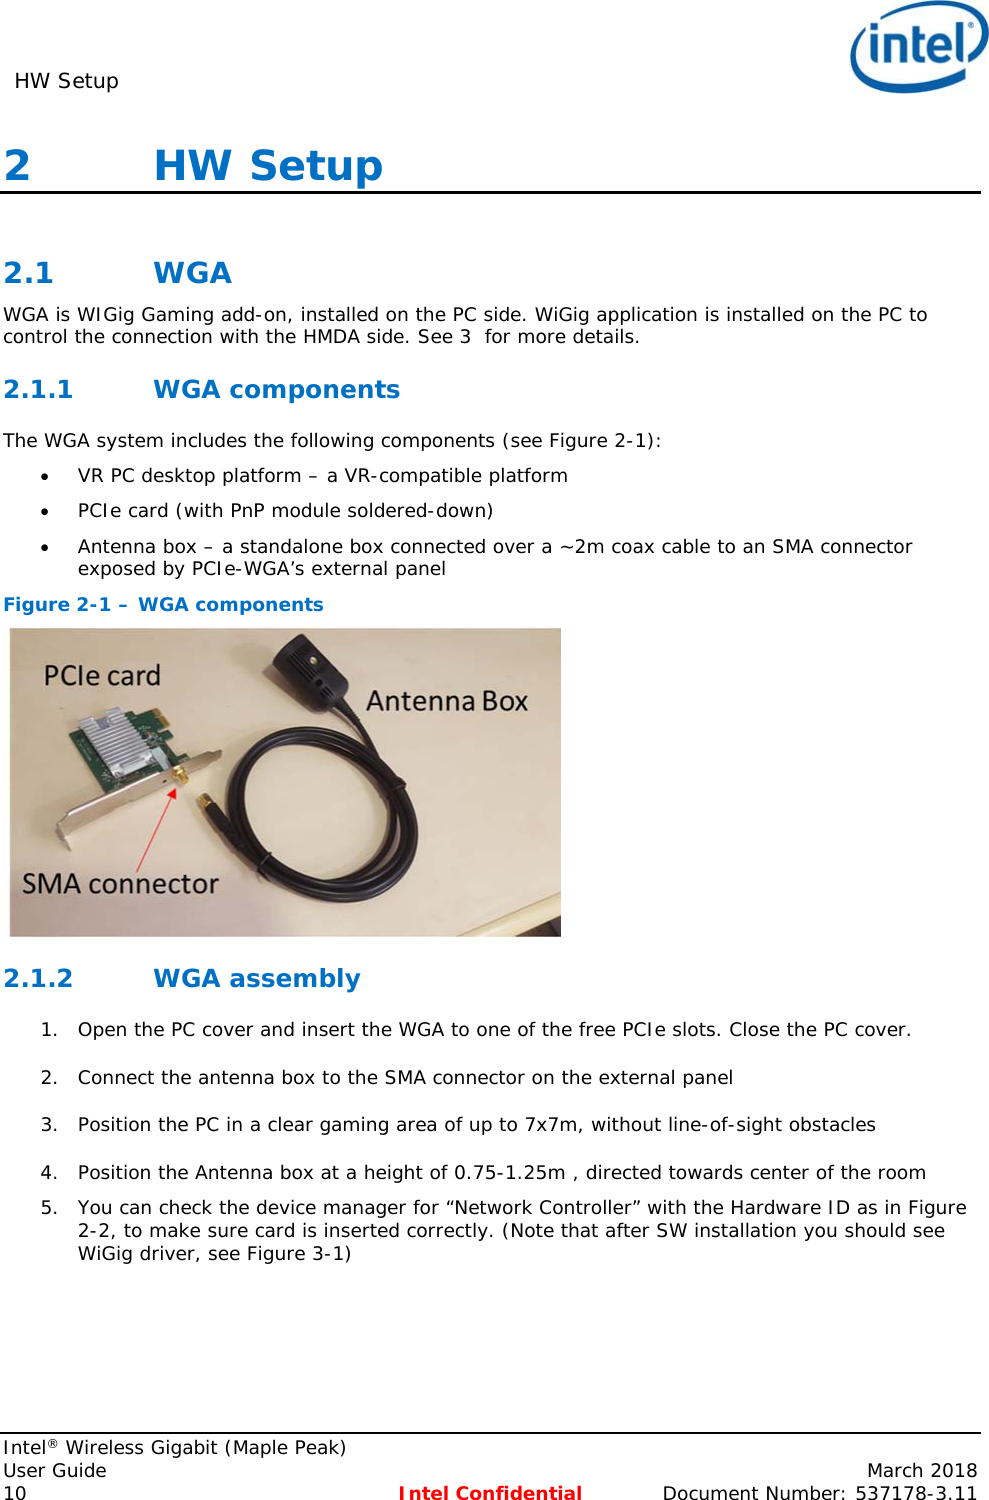 HW Setup     Intel® Wireless Gigabit (Maple Peak) User Guide    March 2018 10 Intel Confidential  Document Number: 537178-3.11 2   HW Setup   2.1 WGA WGA is WIGig Gaming add-on, installed on the PC side. WiGig application is installed on the PC to control the connection with the HMDA side. See 3  for more details. 2.1.1 WGA components The WGA system includes the following components (see Figure 2-1):  VR PC desktop platform – a VR-compatible platform  PCIe card (with PnP module soldered-down)  Antenna box – a standalone box connected over a ~2m coax cable to an SMA connector exposed by PCIe-WGA’s external panel Figure 2-1 – WGA components  2.1.2 WGA assembly 1. Open the PC cover and insert the WGA to one of the free PCIe slots. Close the PC cover. 2. Connect the antenna box to the SMA connector on the external panel  3. Position the PC in a clear gaming area of up to 7x7m, without line-of-sight obstacles   4. Position the Antenna box at a height of 0.75-1.25m , directed towards center of the room 5. You can check the device manager for “Network Controller” with the Hardware ID as in Figure 2-2, to make sure card is inserted correctly. (Note that after SW installation you should see WiGig driver, see Figure 3-1) 